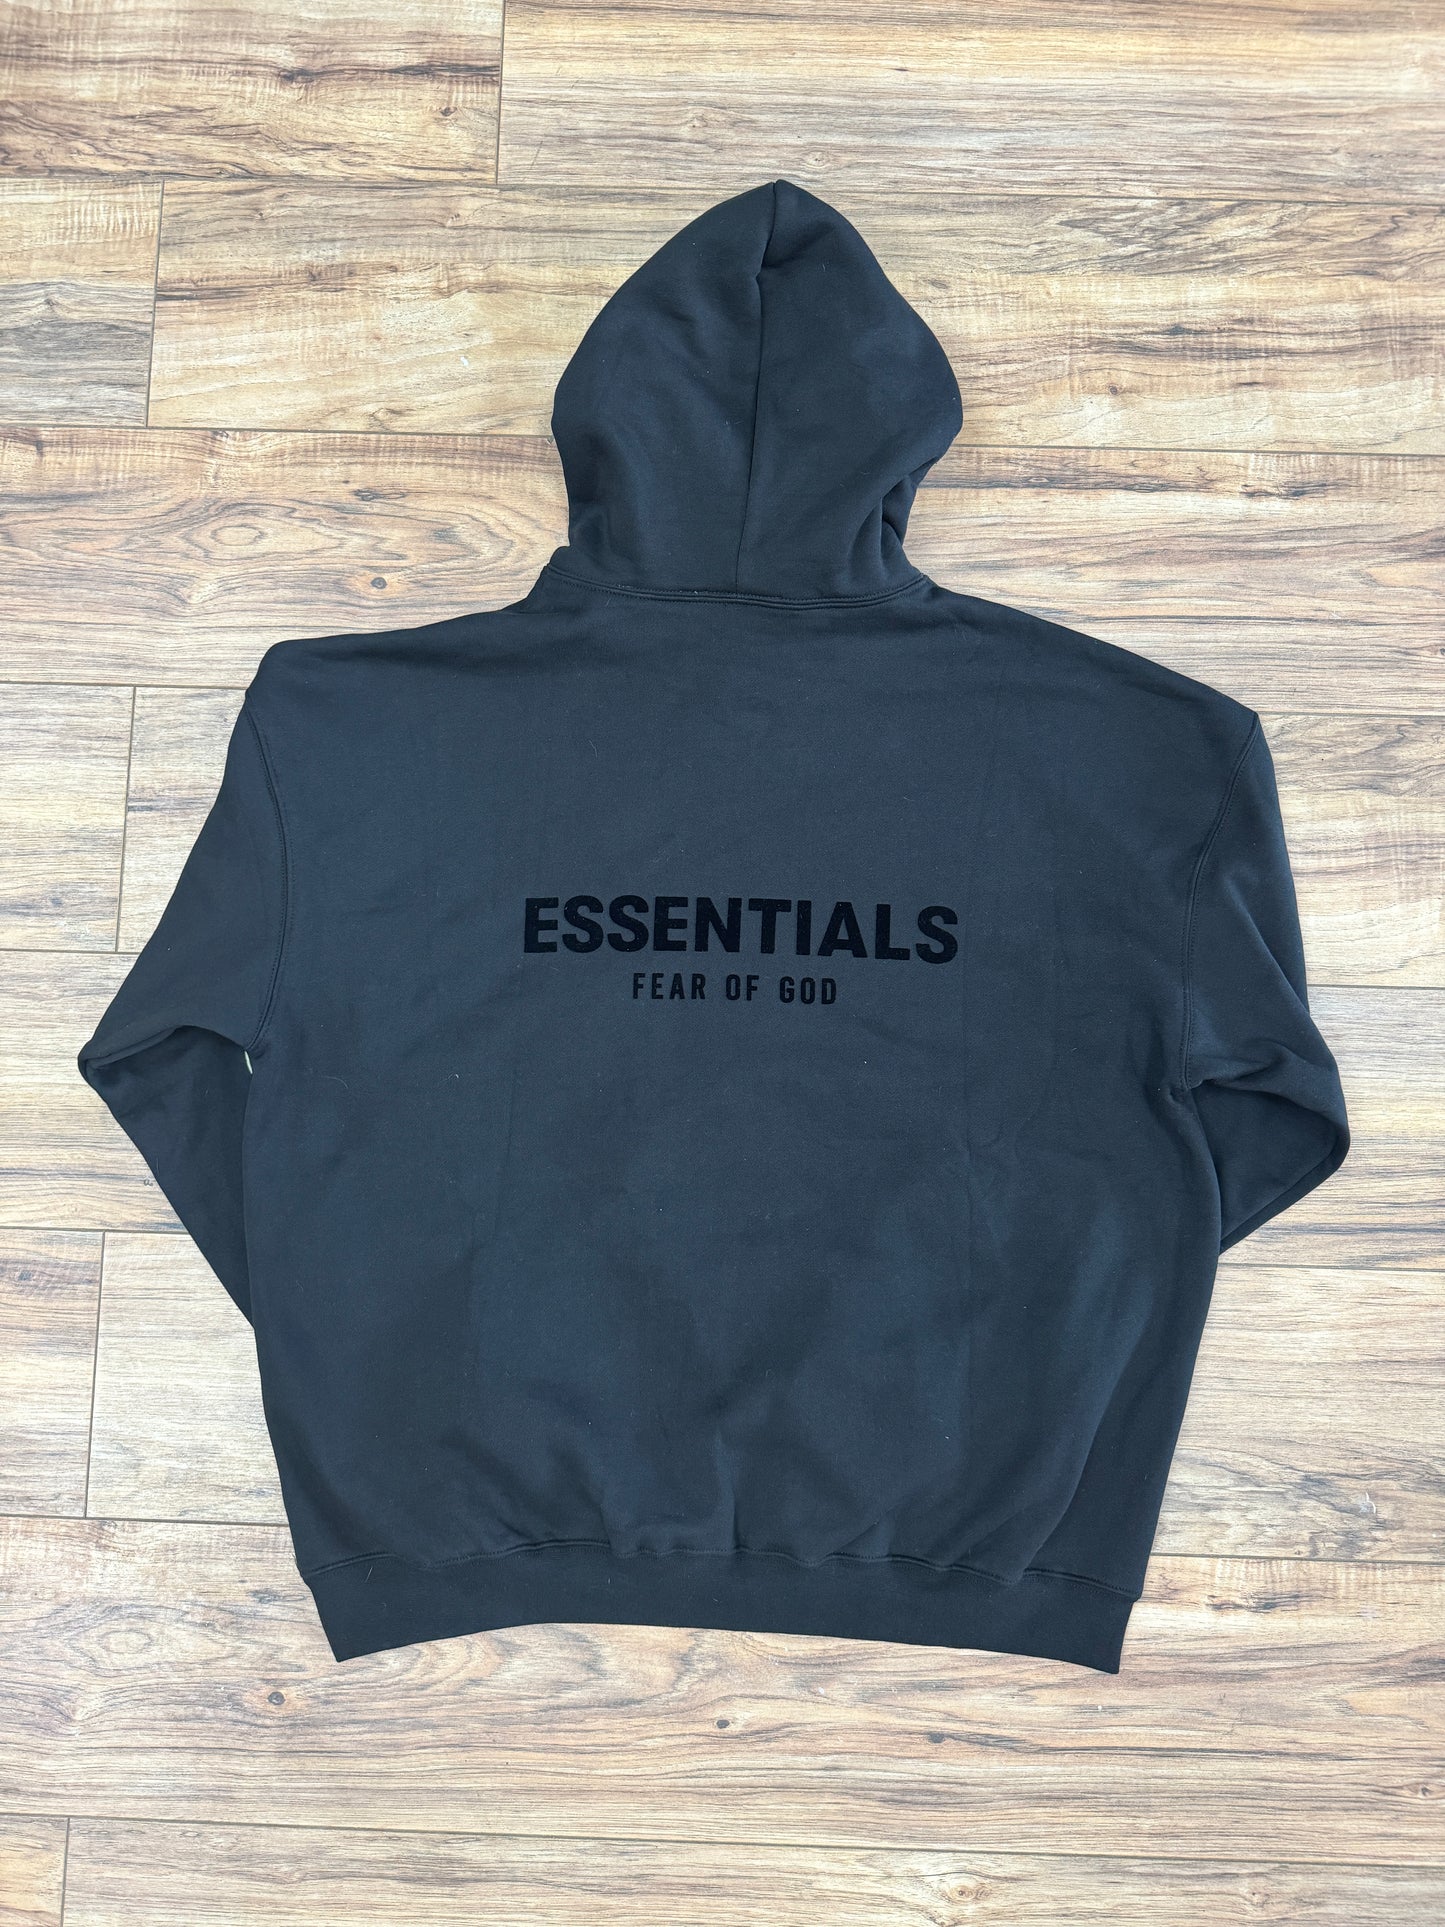 Fear of God Essentials Pullover Hoodie "Stretch Limo"